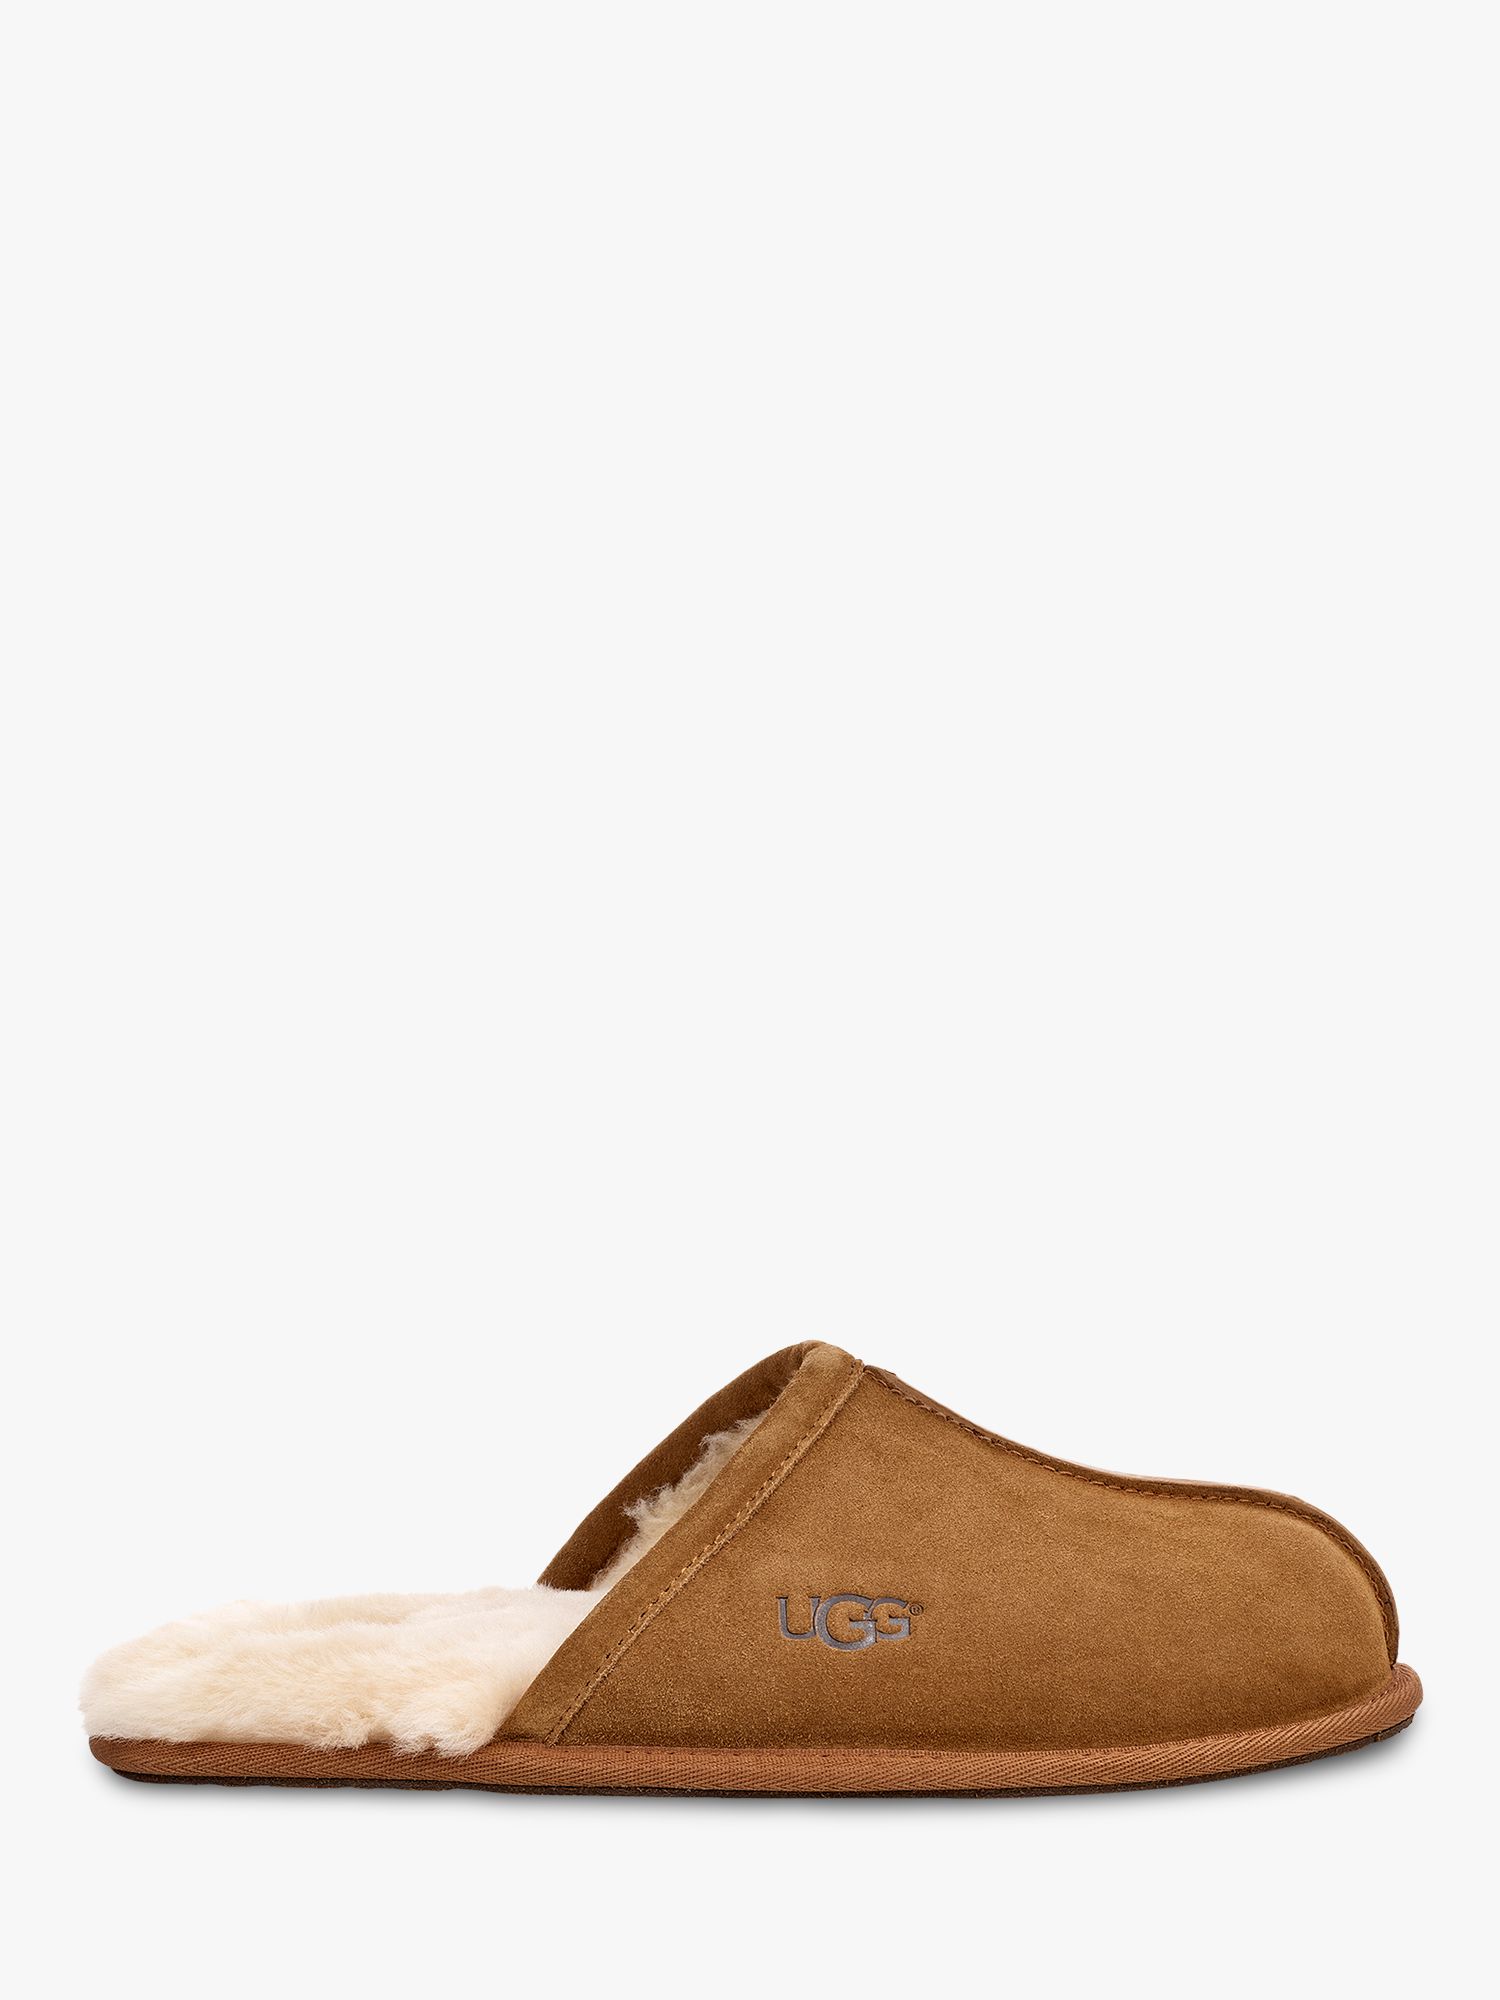 ugg suede slippers